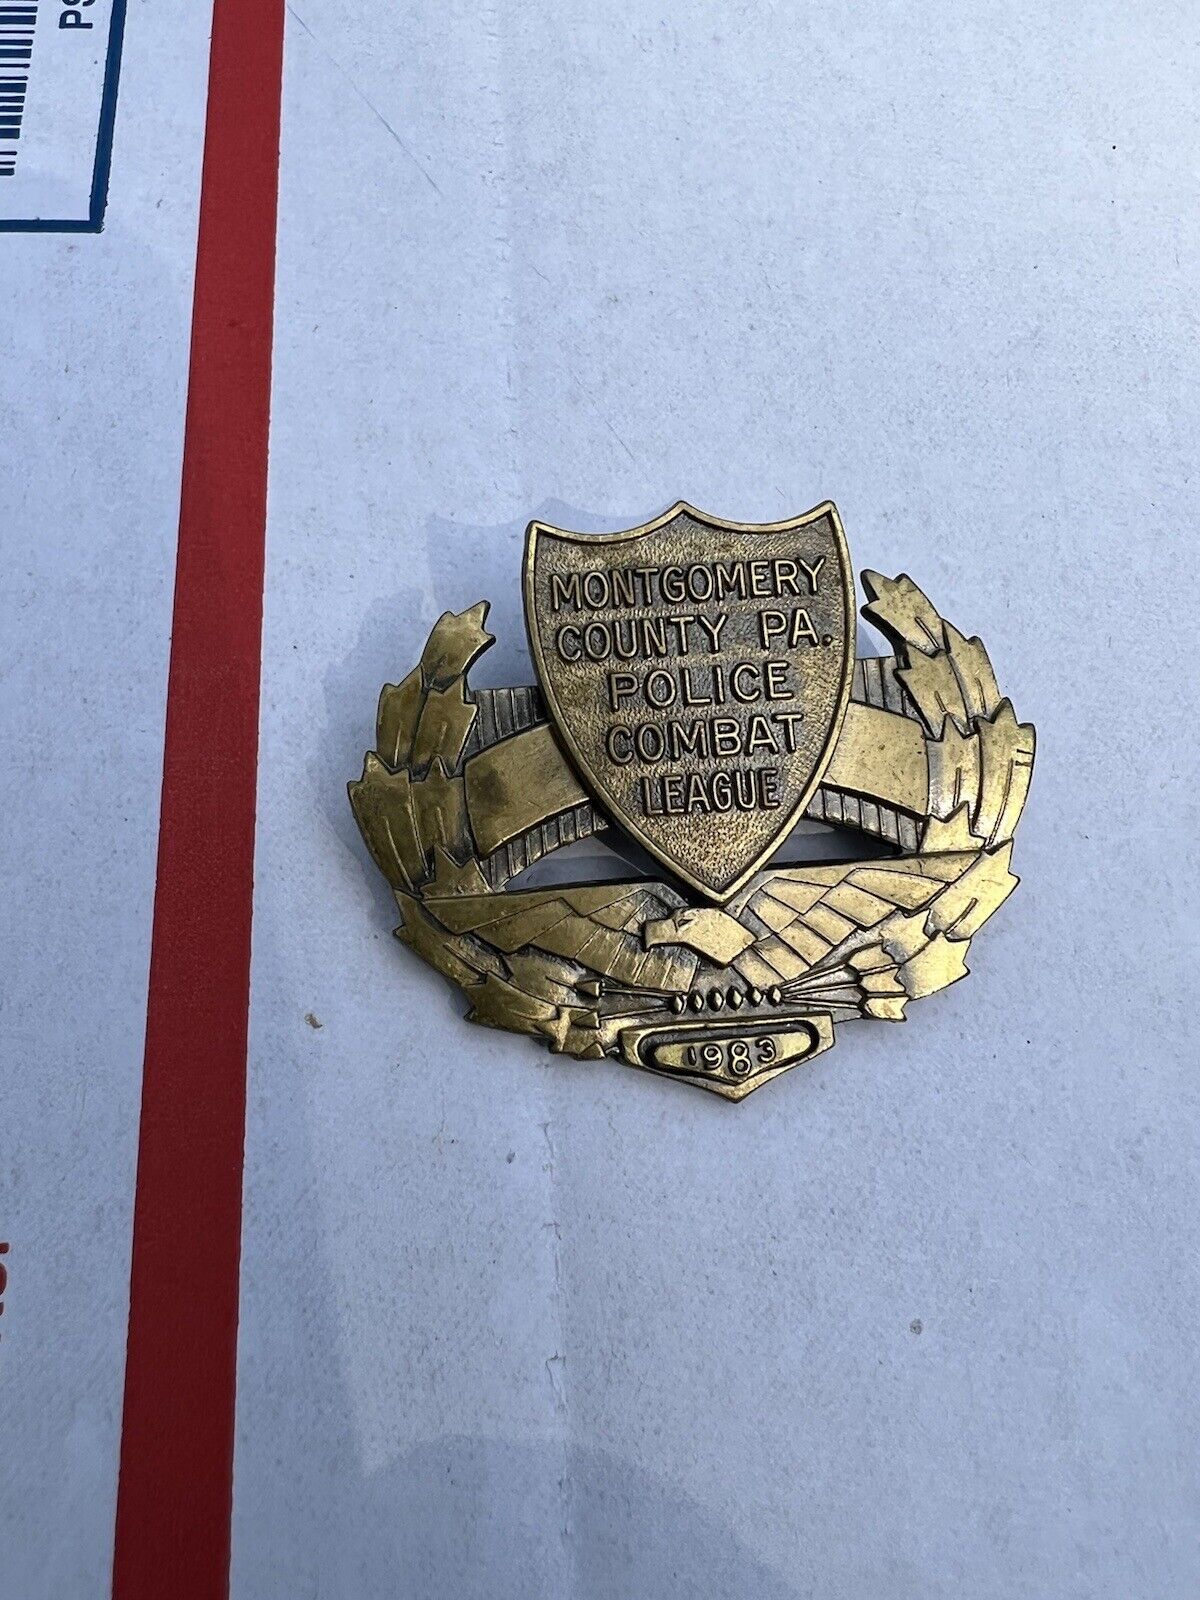 Vintage obsolete Montgomery County PA combat League Badge